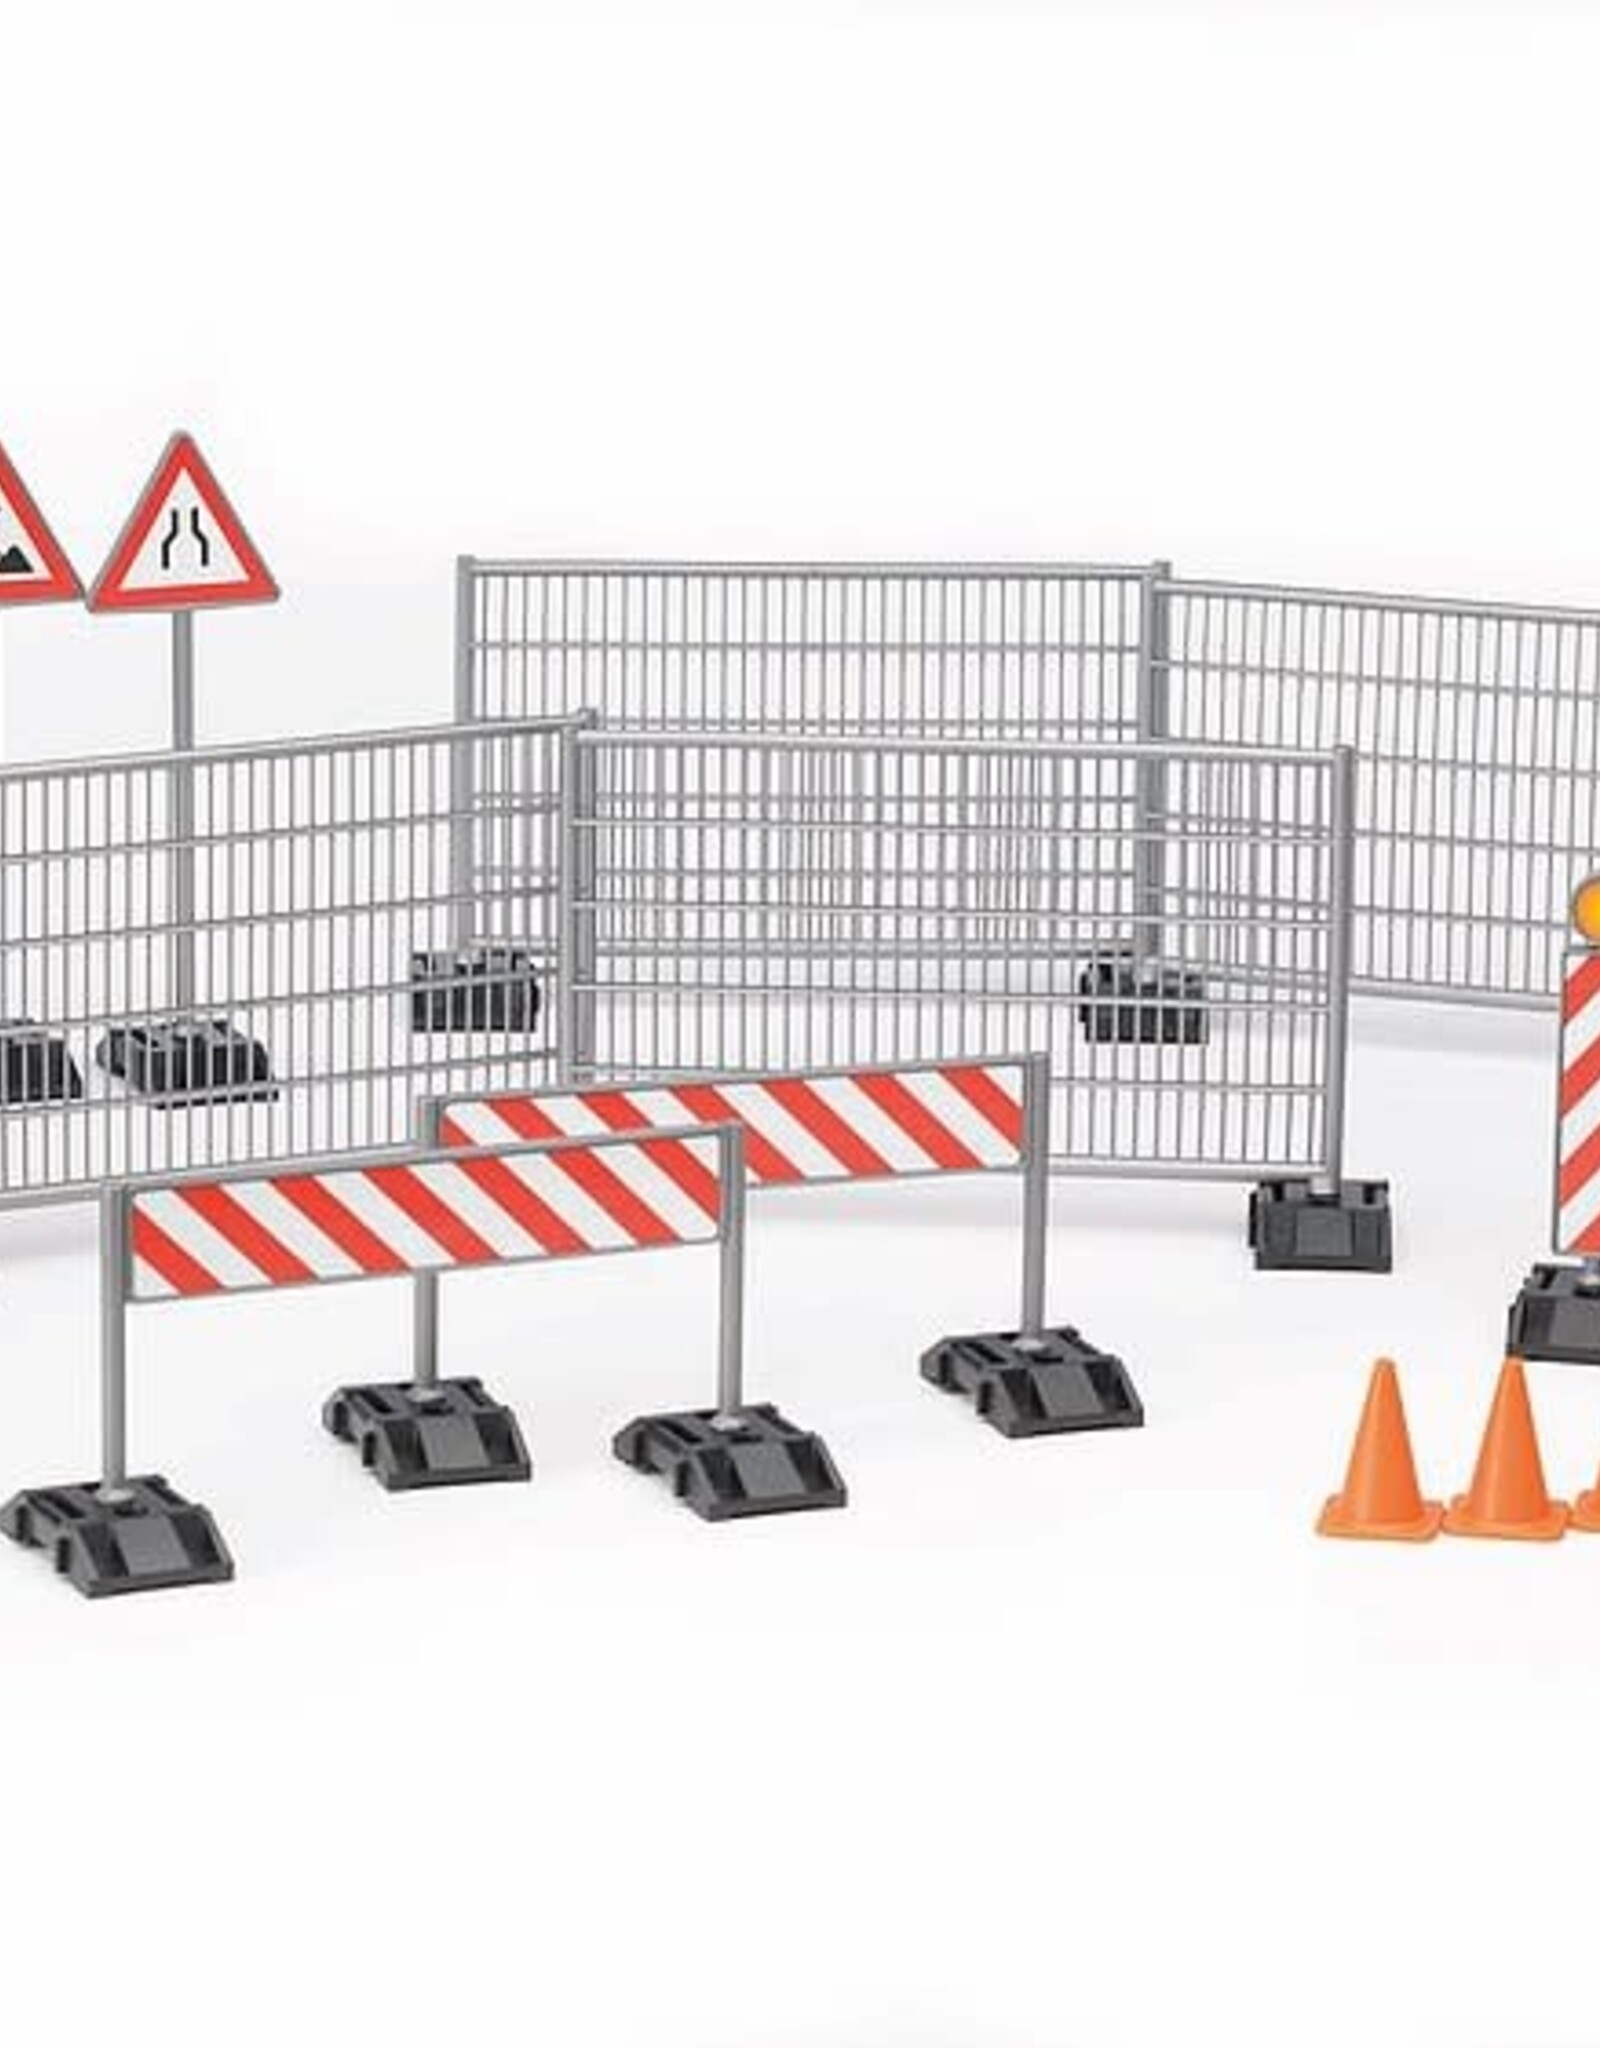 BRUDER TOYS AMERICA INC Accessories Construction set: railings, site signs and pylon